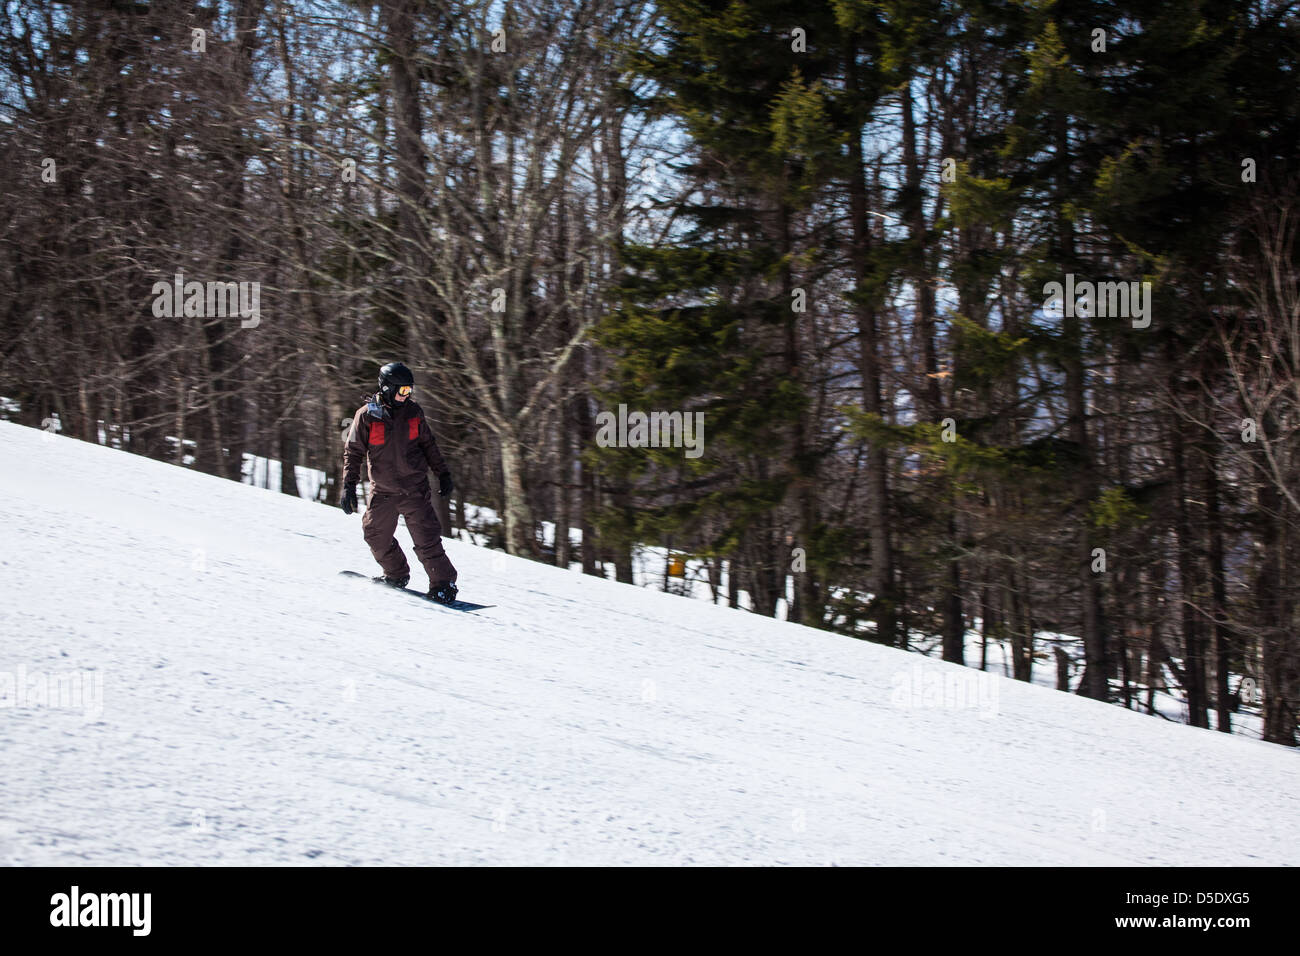 A snowboarder rides down the slopes of Snowshoe Mountain, WV. Stock Photo